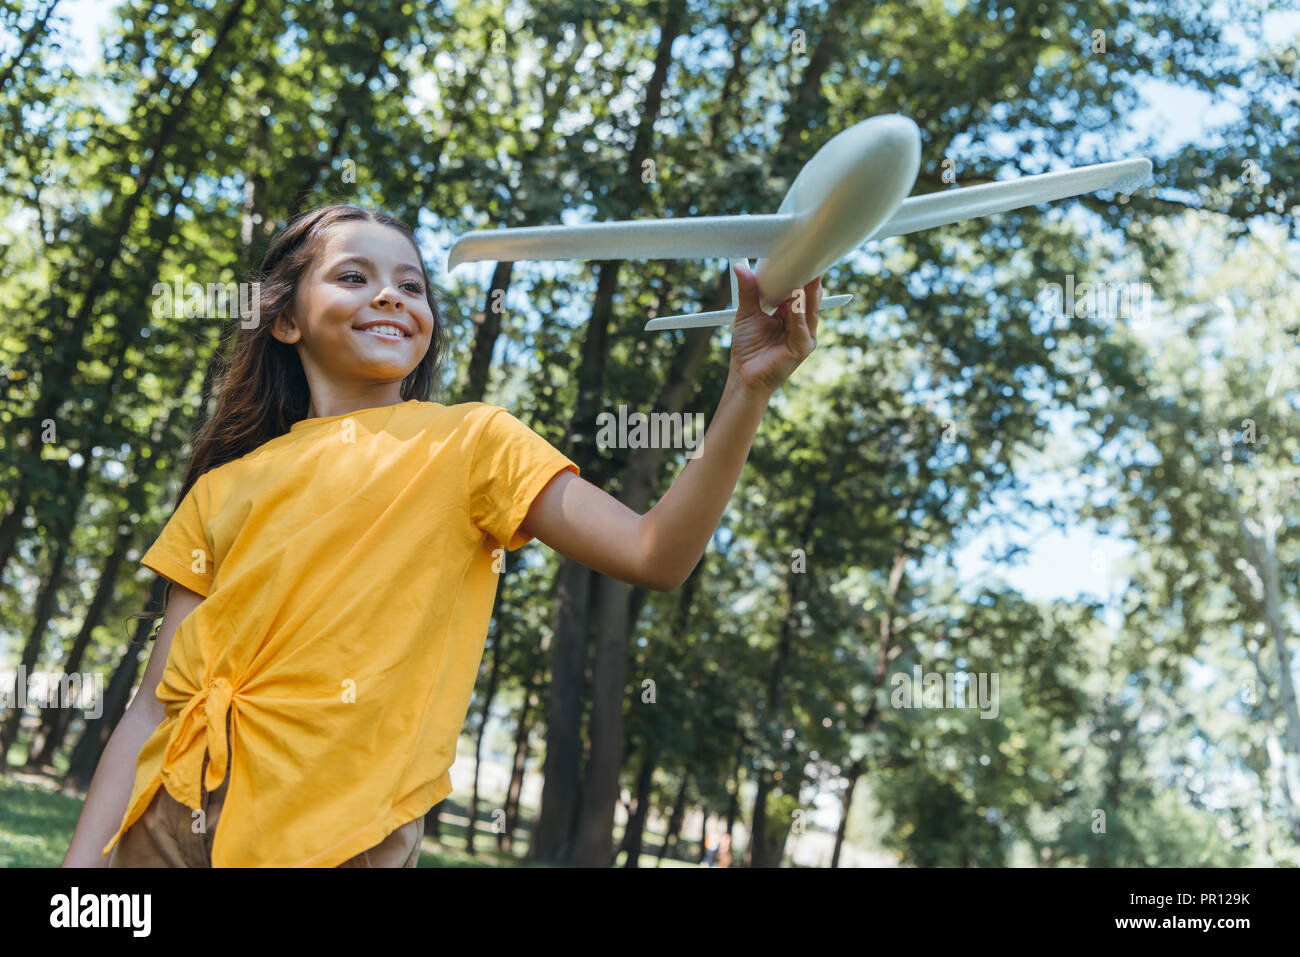 low angle view of cute happy child holding toy plane in park Stock Photo